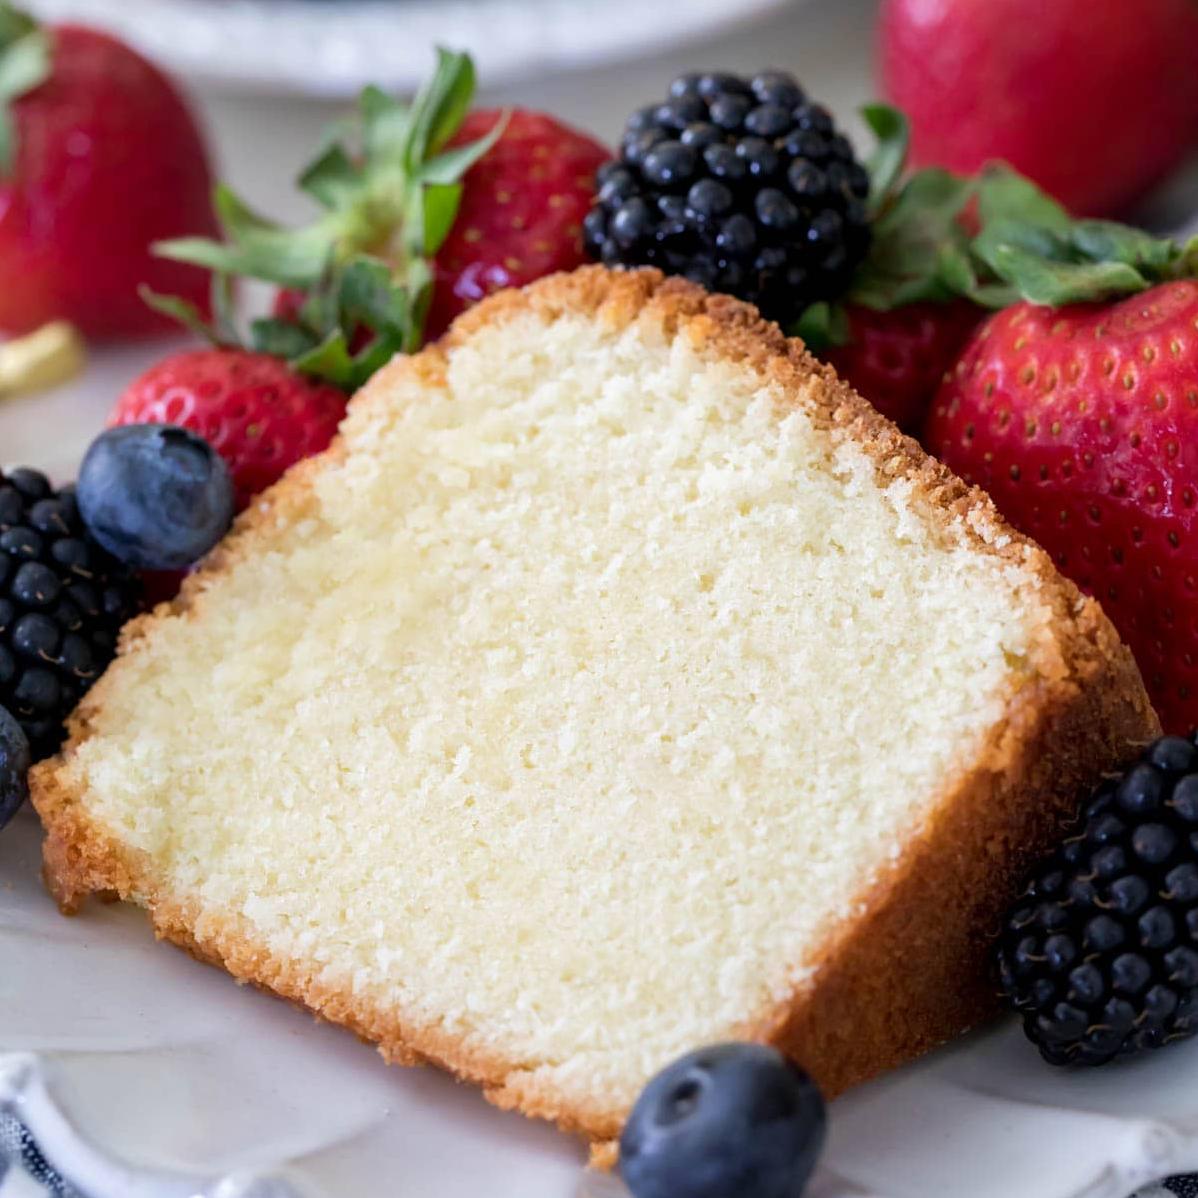  The classic buttery pound cake, perfected.